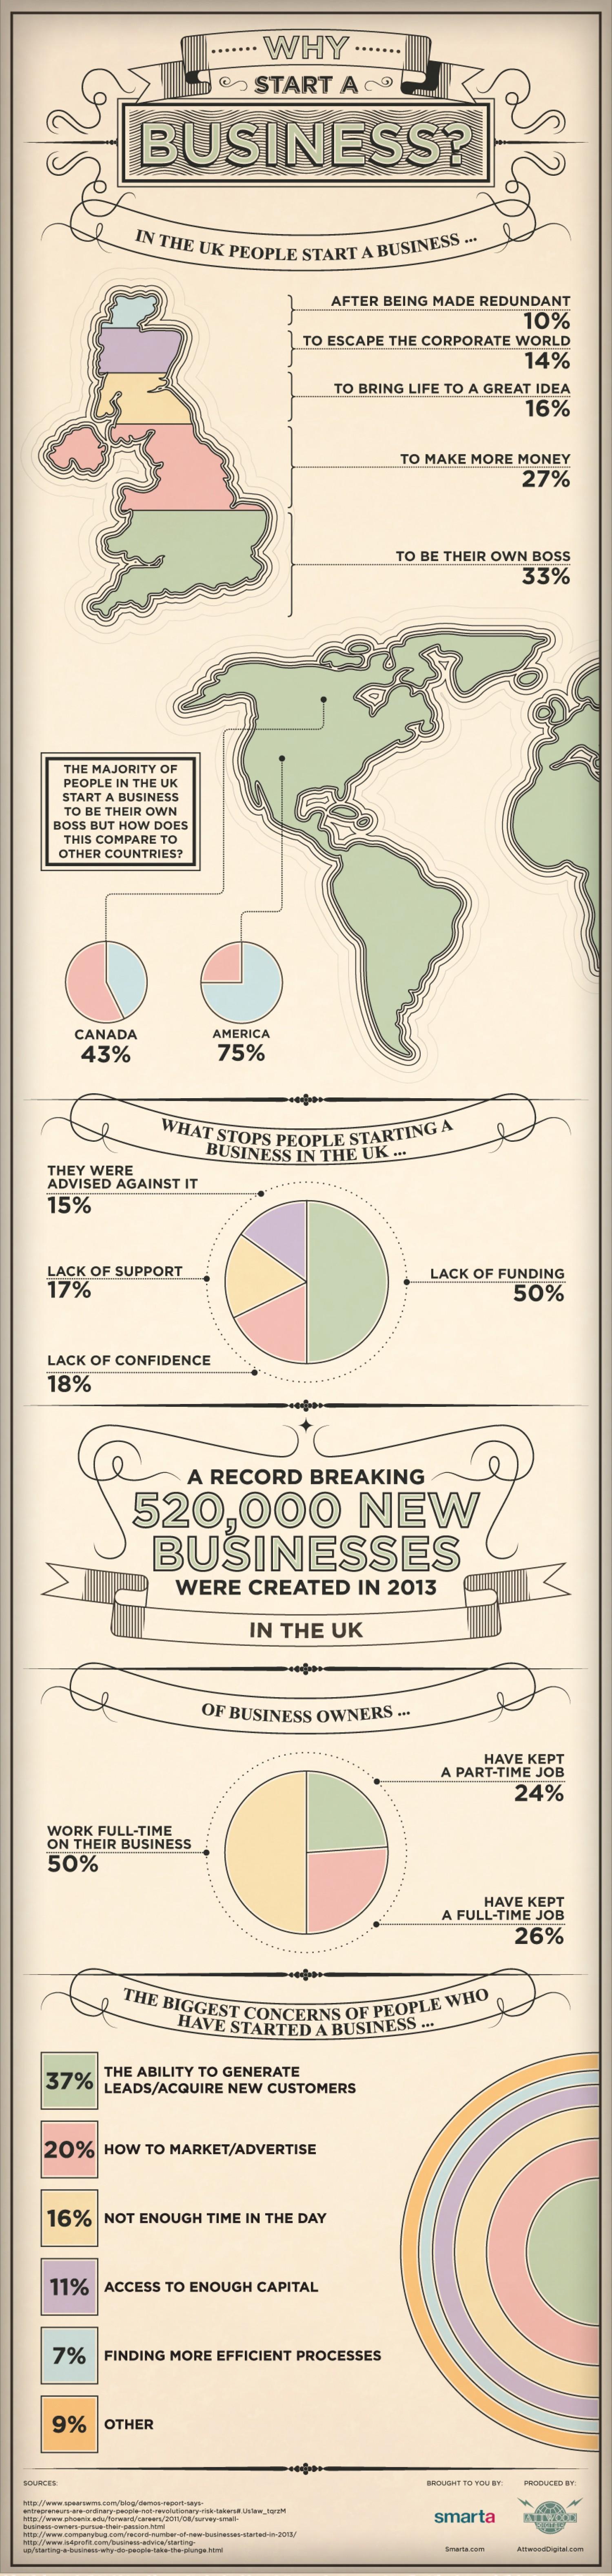 Why Should You Start a Business [Infographic]